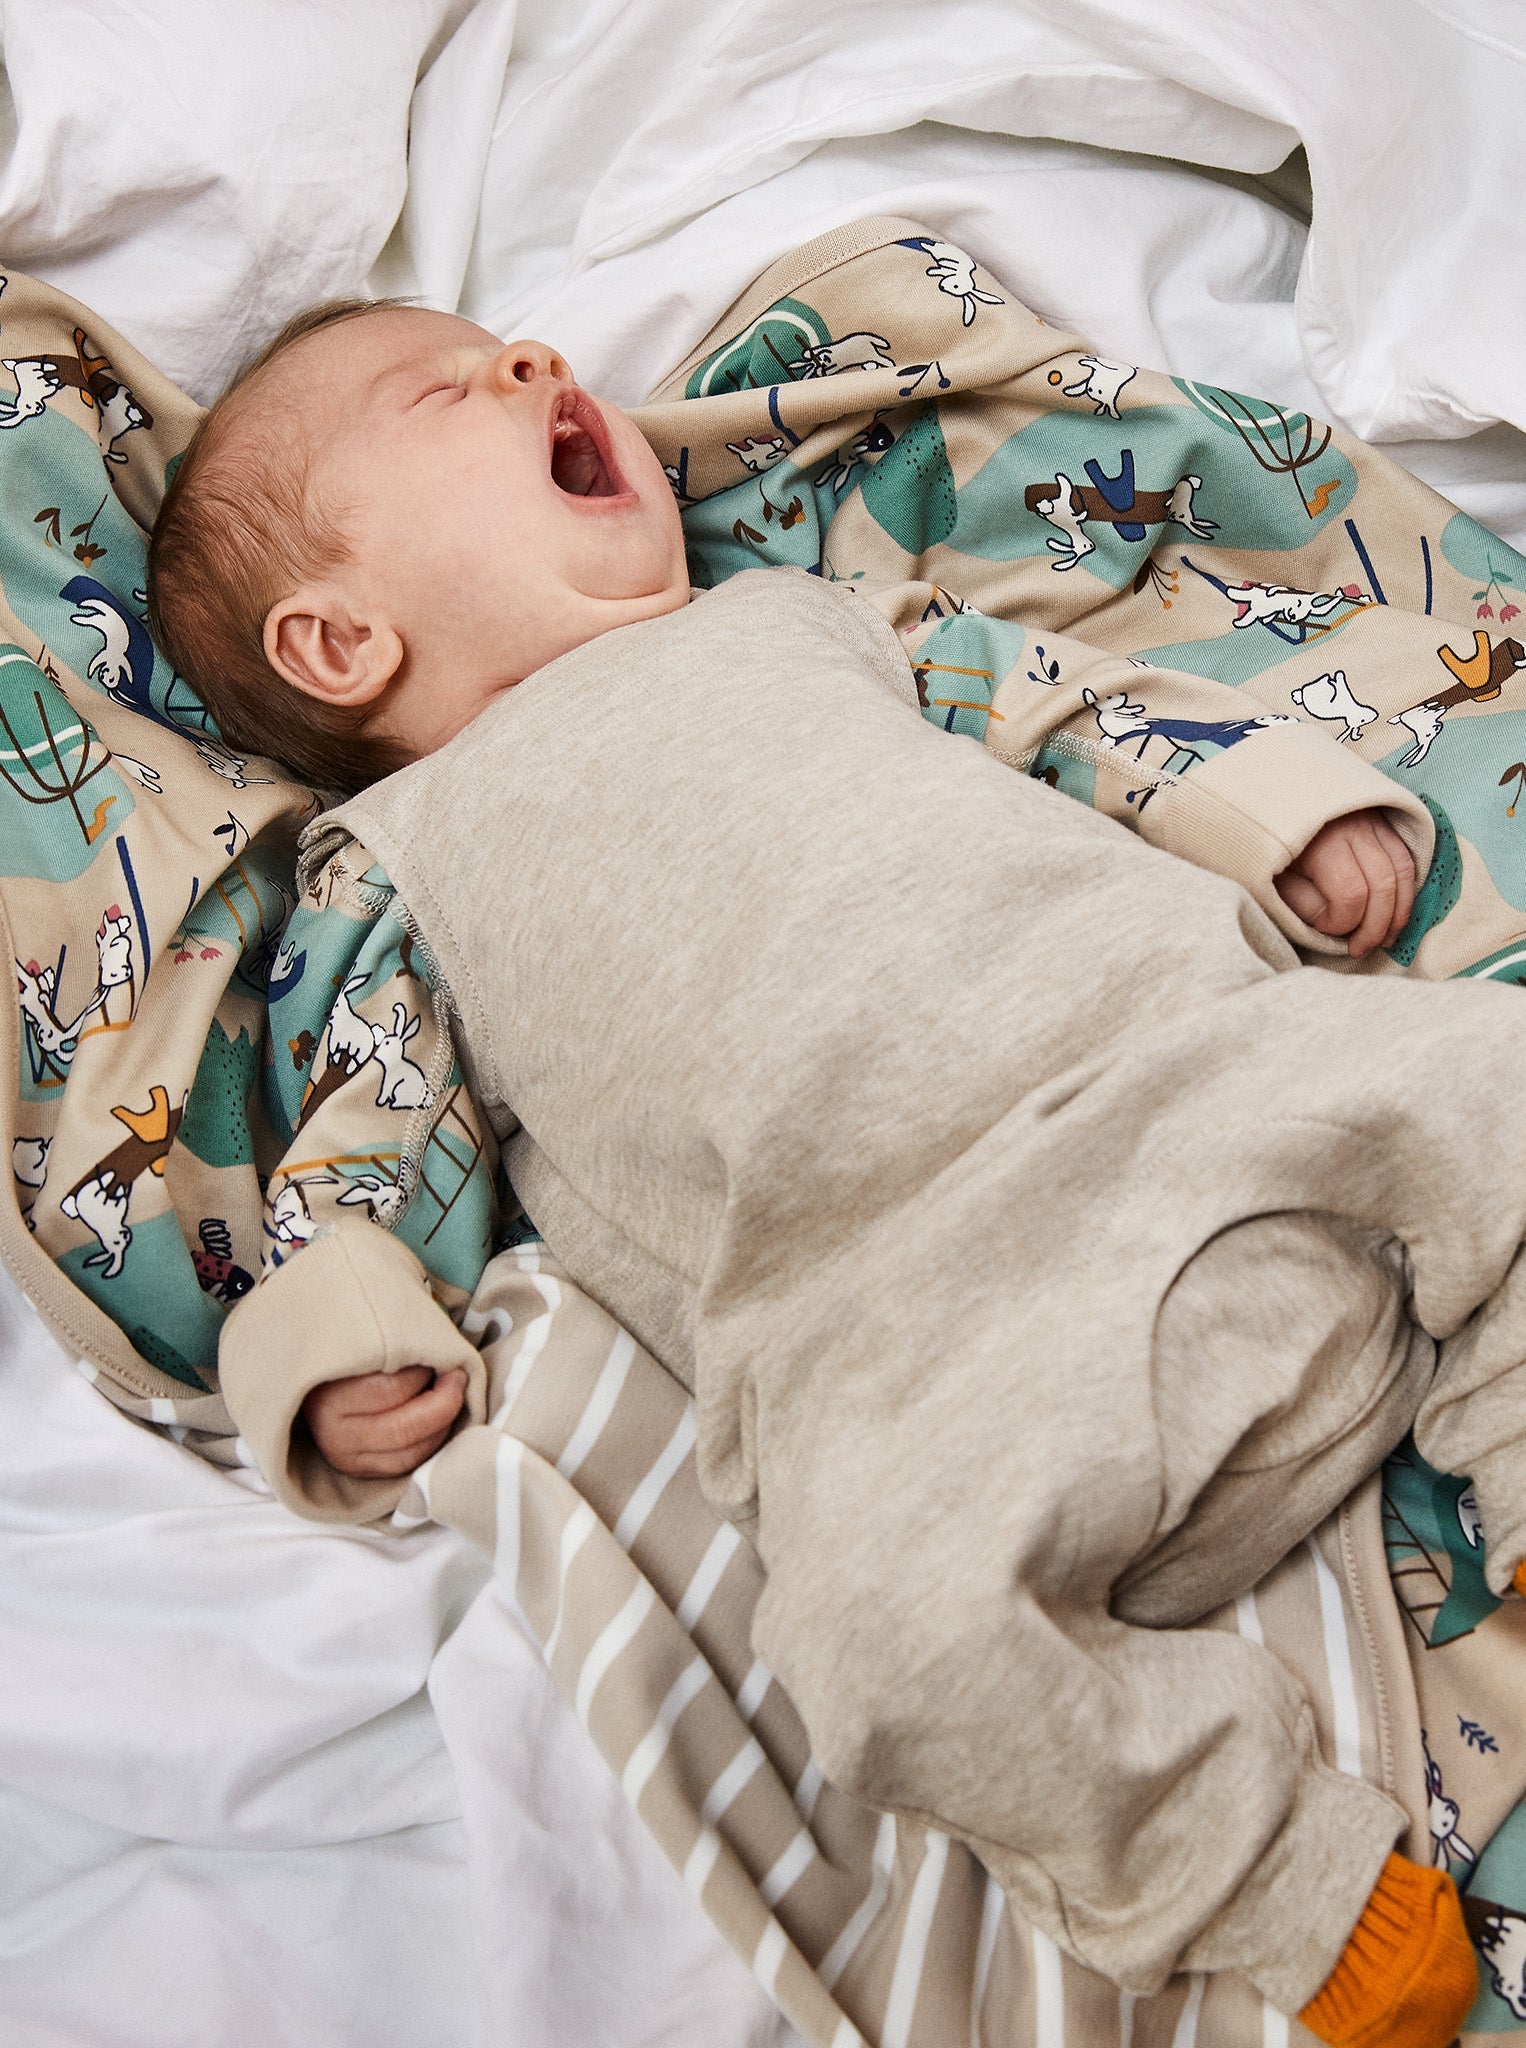 Organic Cotton Beige Baby Blanket from the Polarn O. Pyret Kidswear collection. Ethically produced kids clothing.